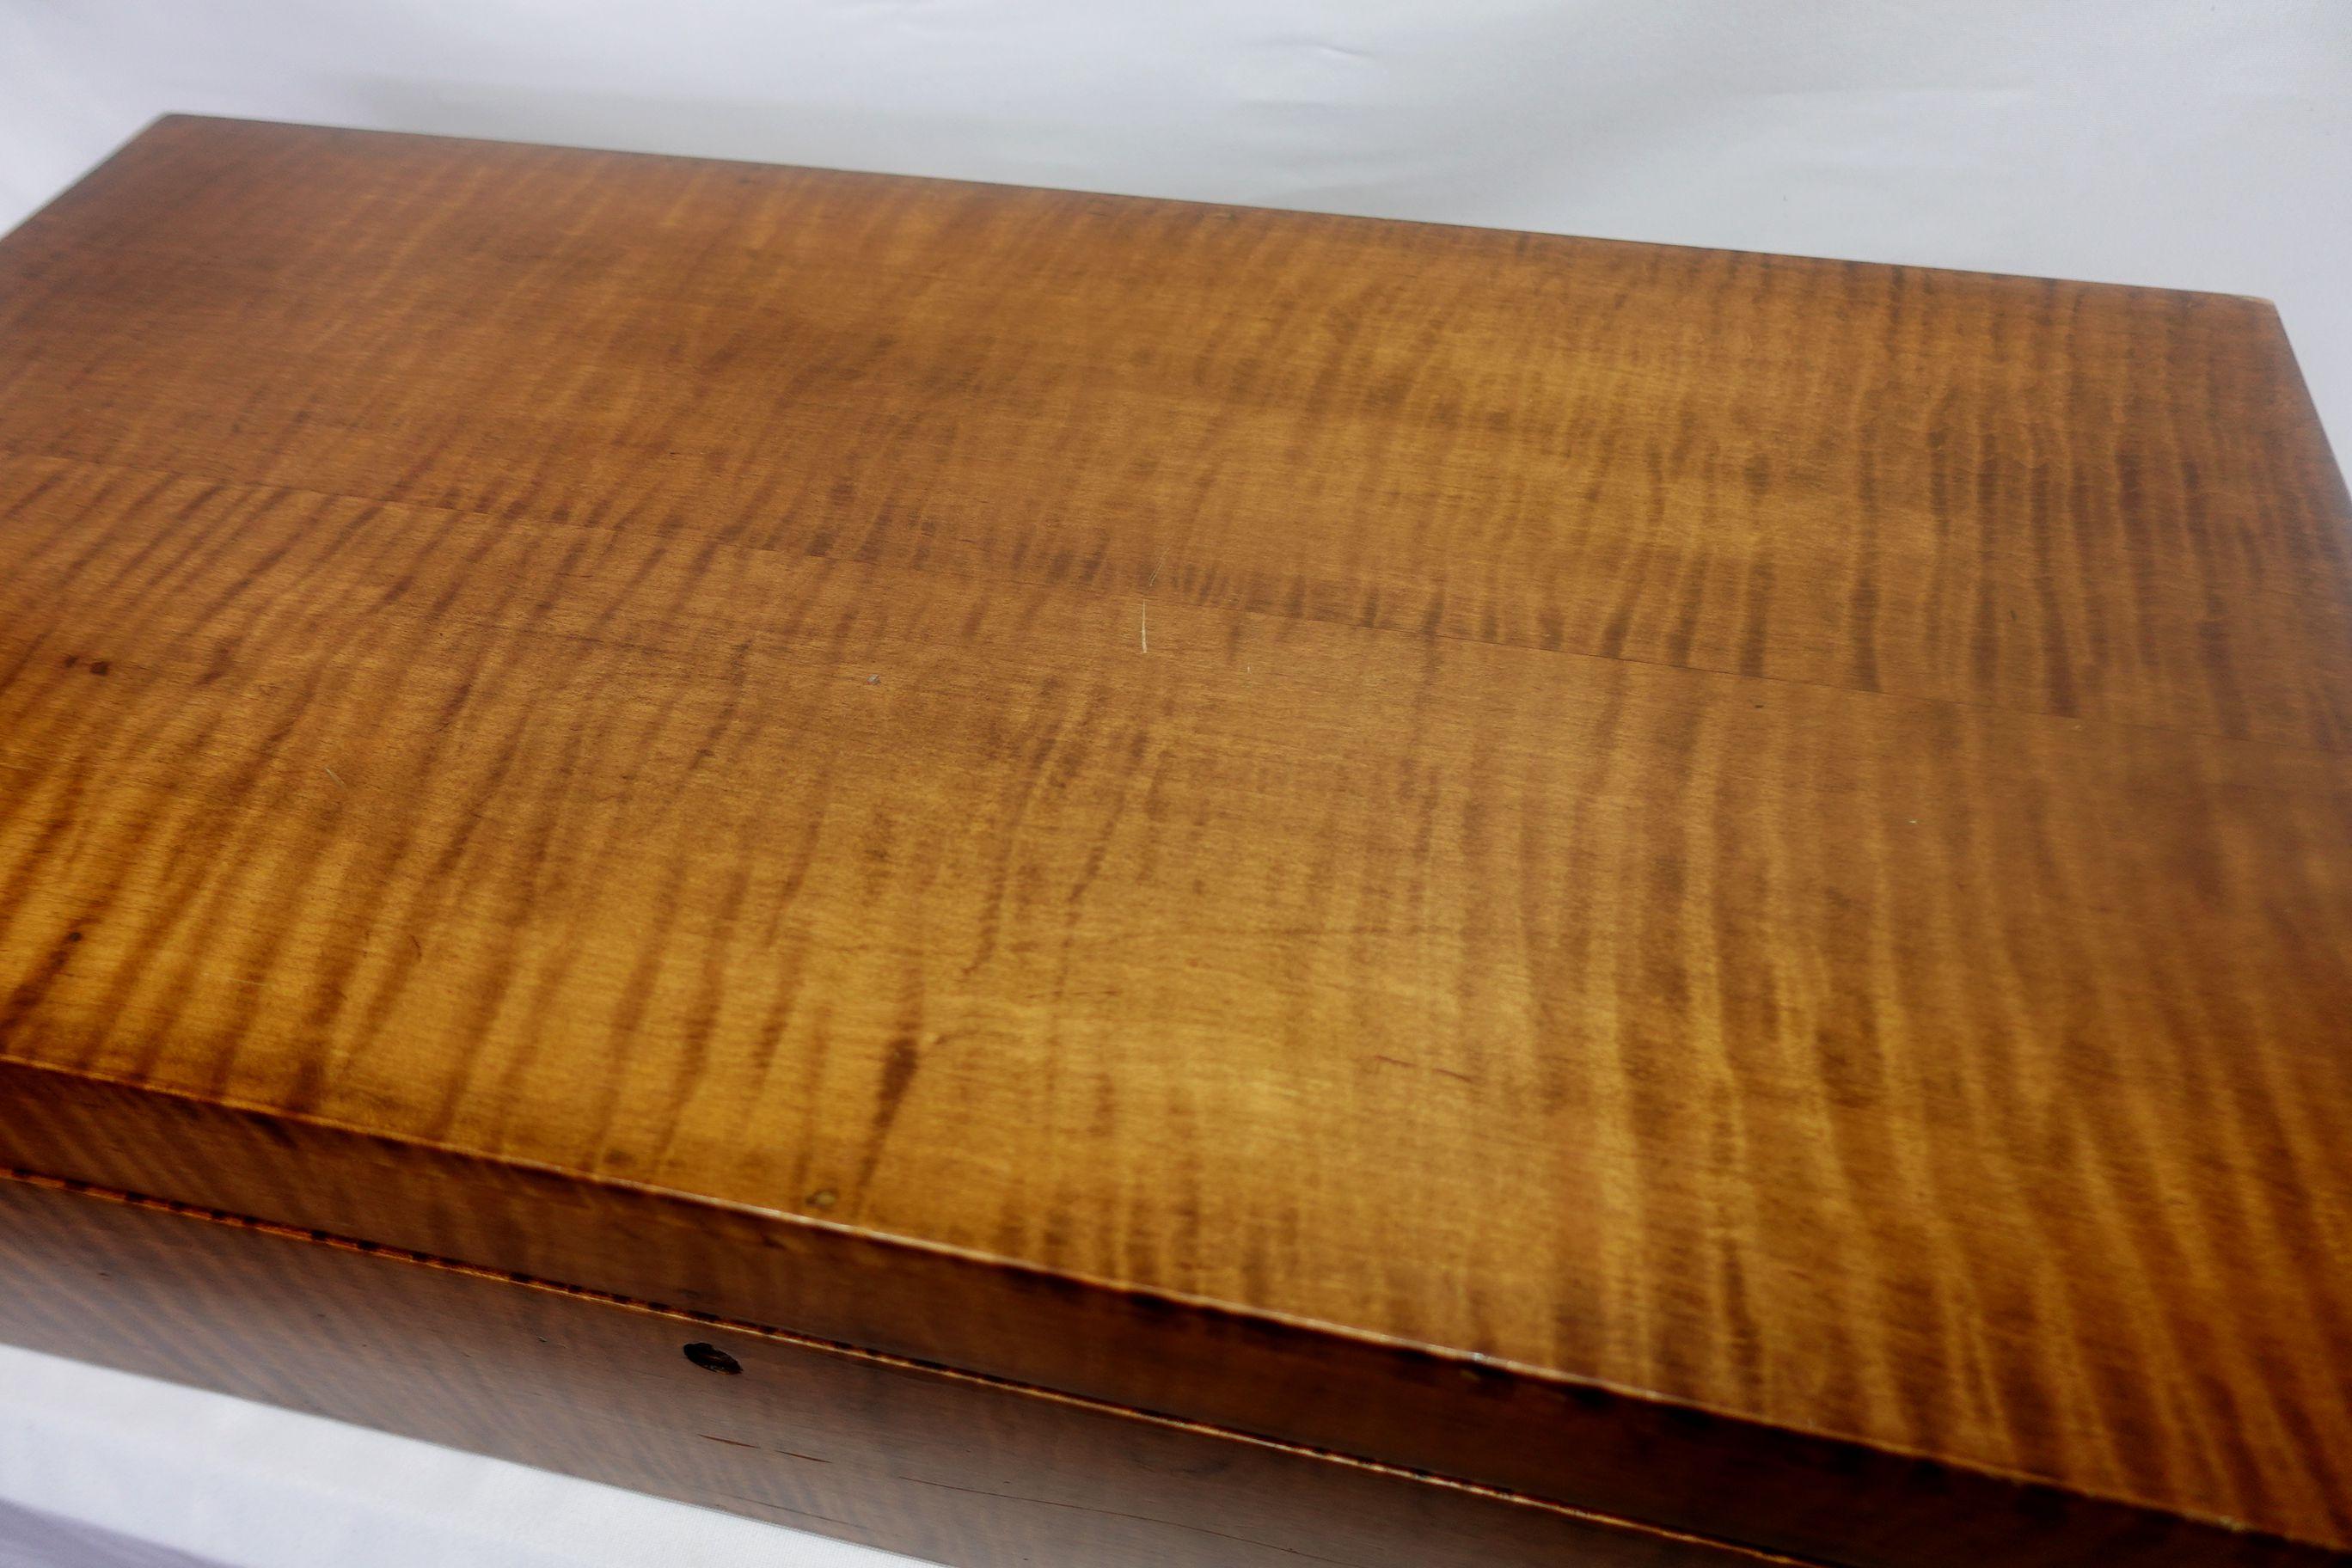 Large late 19th-century to early 20th century Country Style Lift-top Maple Box with the charming pattern of Tiger Skin, no key included.
Measures: ht. 8 1/2, wd. 30, dp. 15 1/2 in.
 